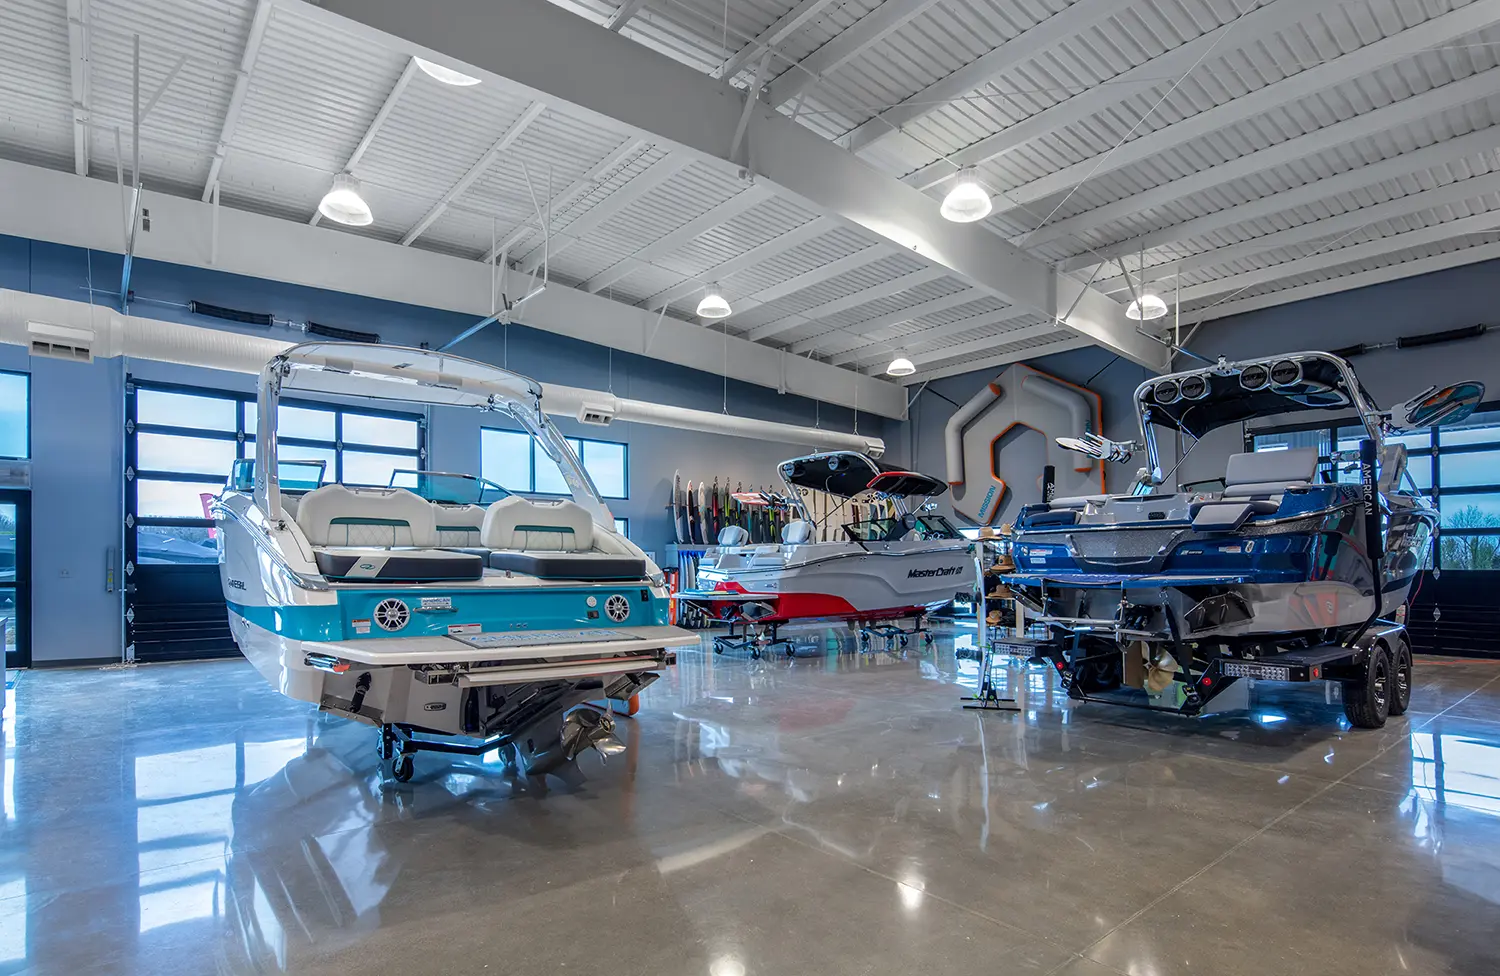 American Water Sports interior with boats